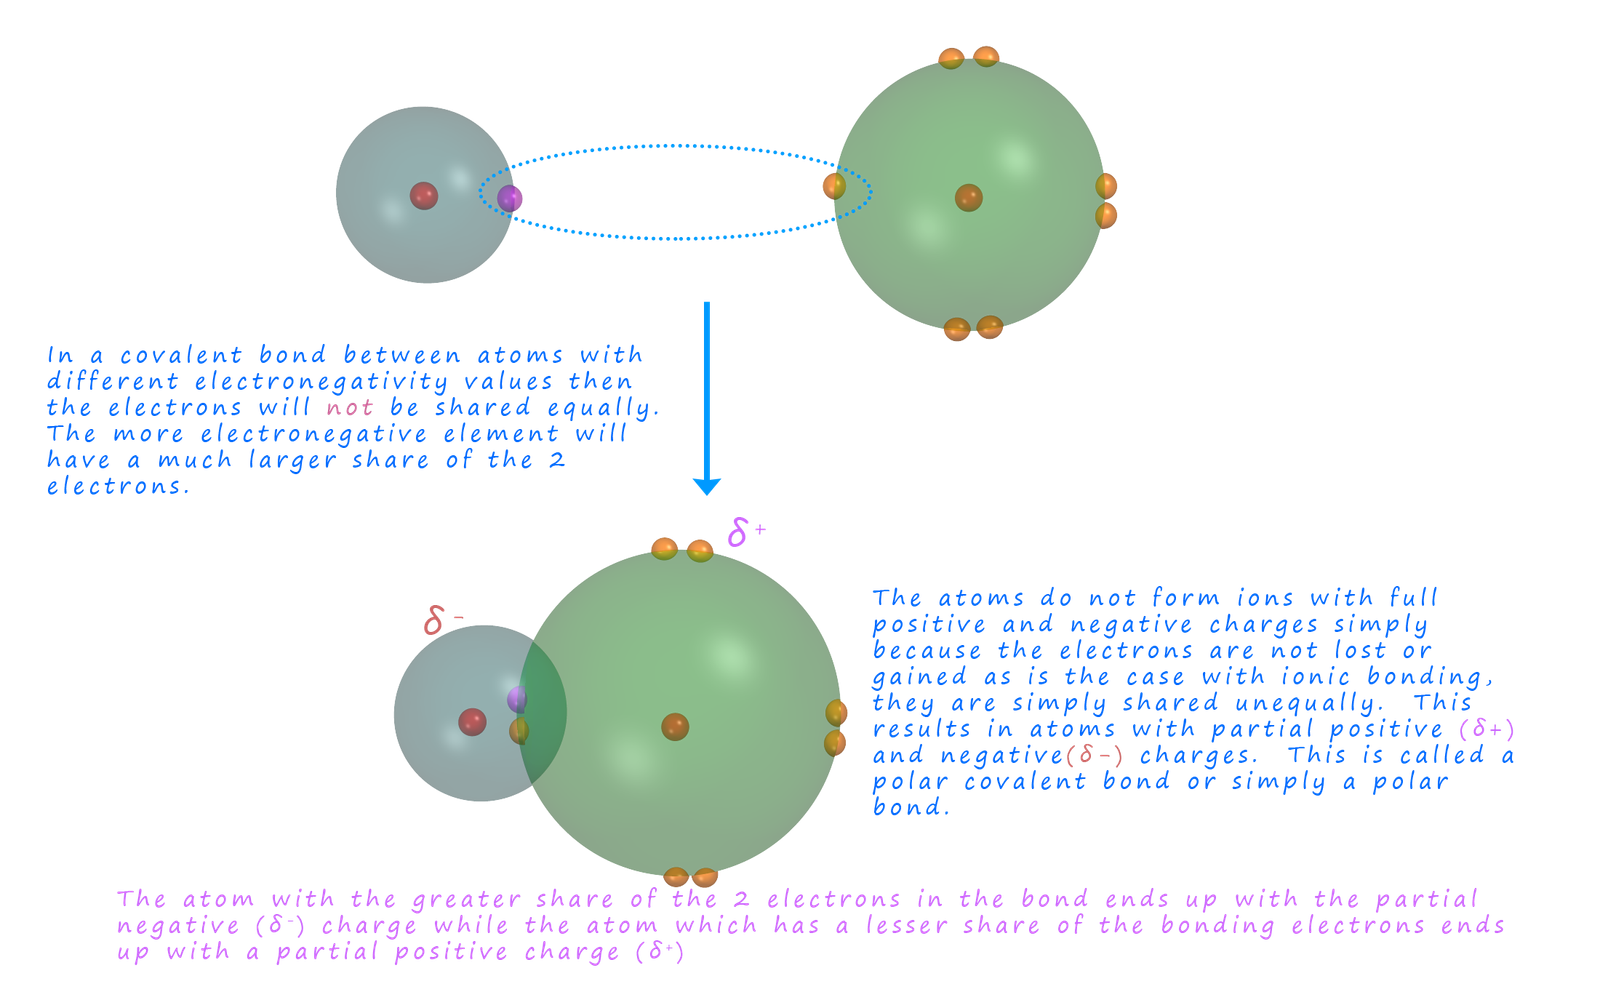 3d model showing how the electrons are shared unequally in a polar covalent bond in a hydrogen chloride molecule.